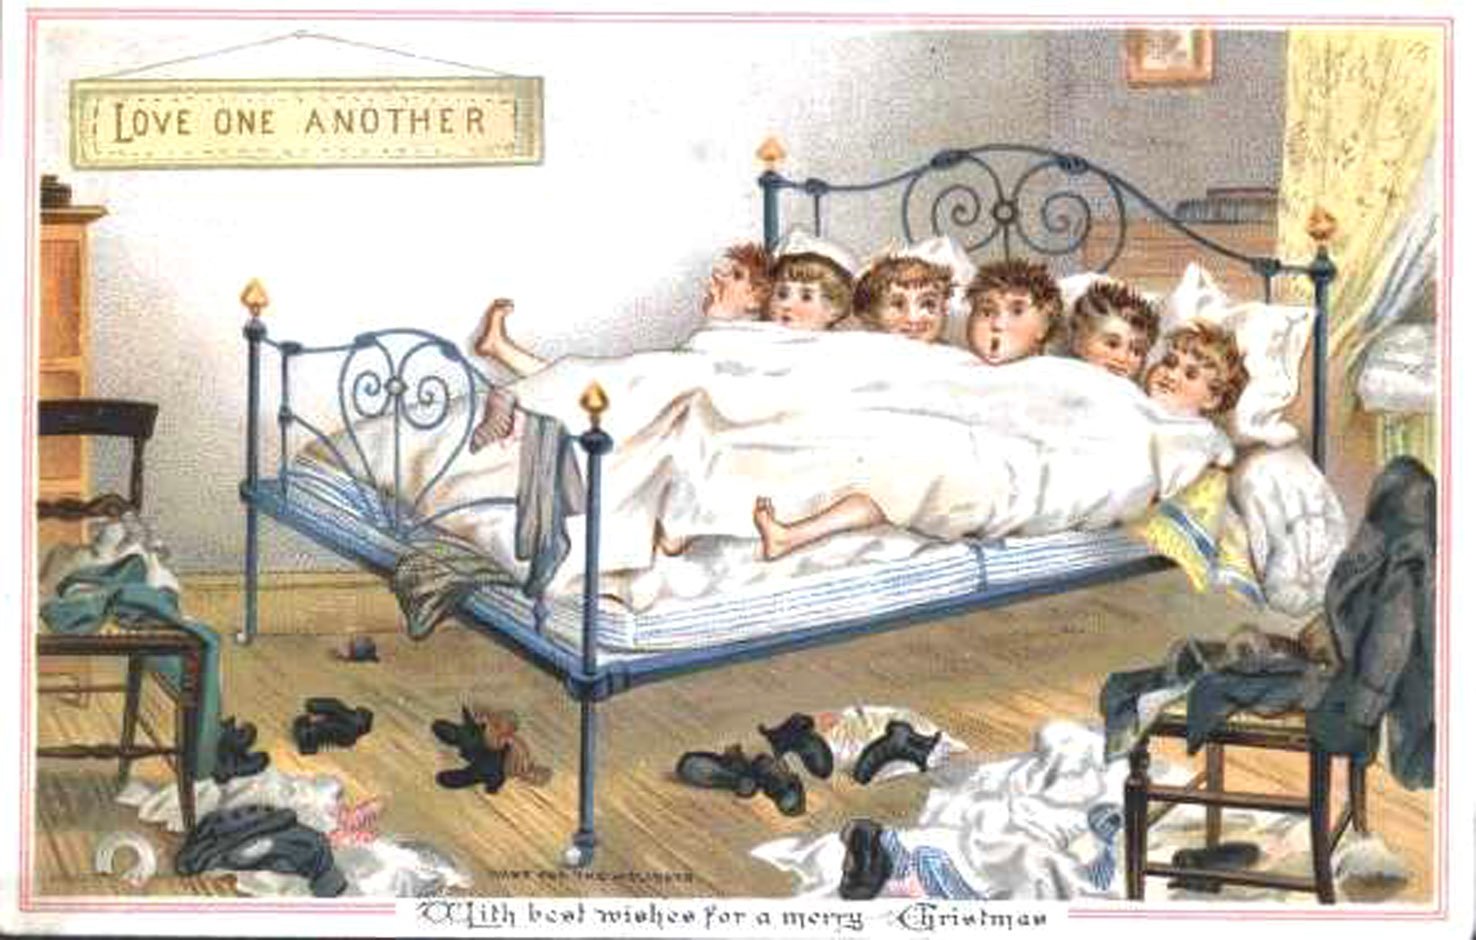 Boys in bedroom 1881 - No 01 in series of four amusing vintage Christmas cards